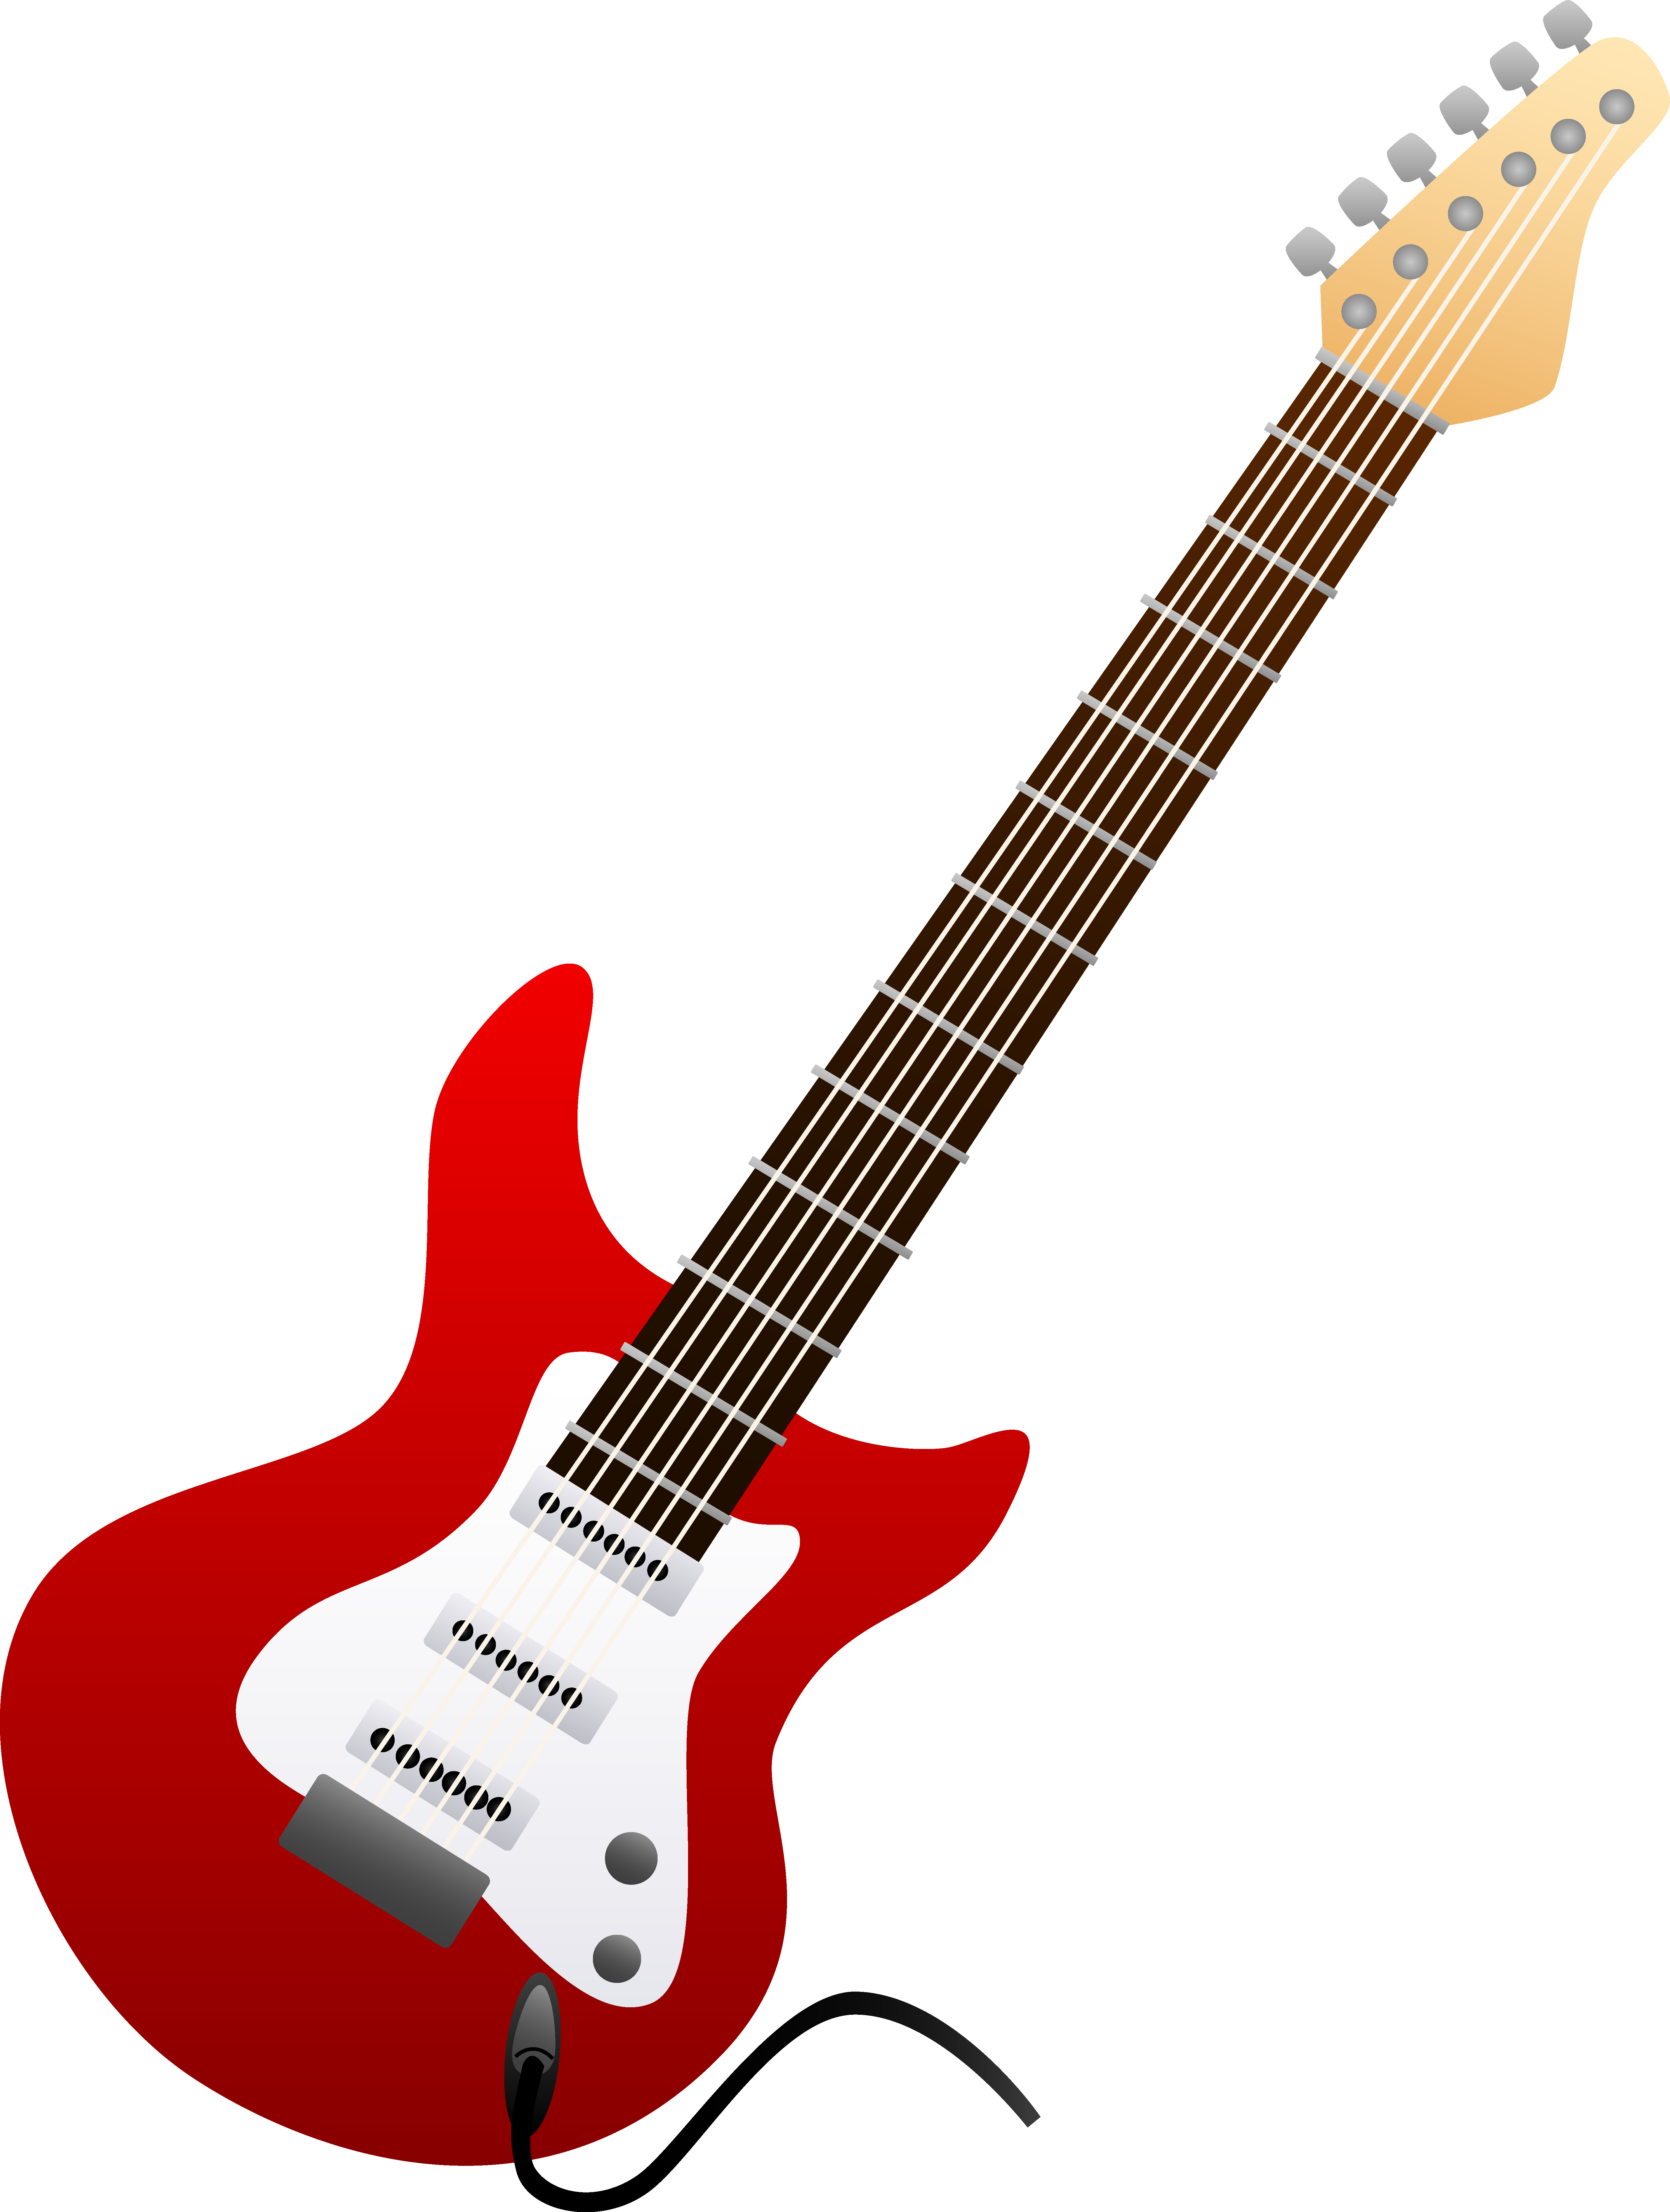 Country Music Guitar | Clipart Panda - Free Clipart Images